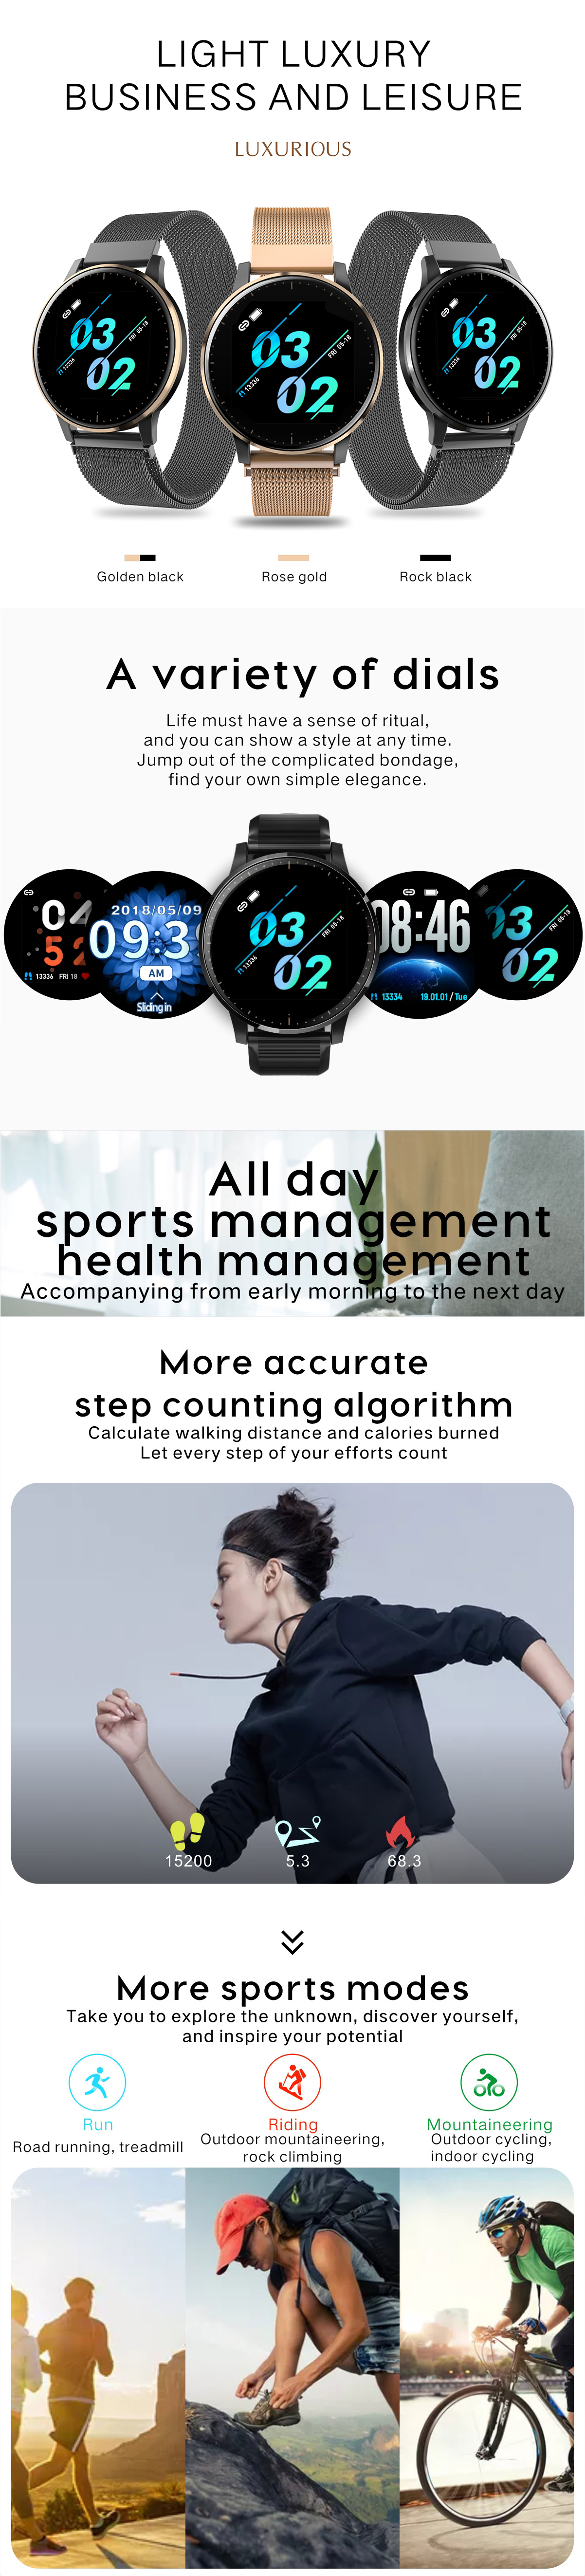 Bakeey-Q20-Full-Touch-Steel-Band-Wristband-Heart-Rate-and-Blood-Pressure-Monitor-Music-Control-Smart-1551689